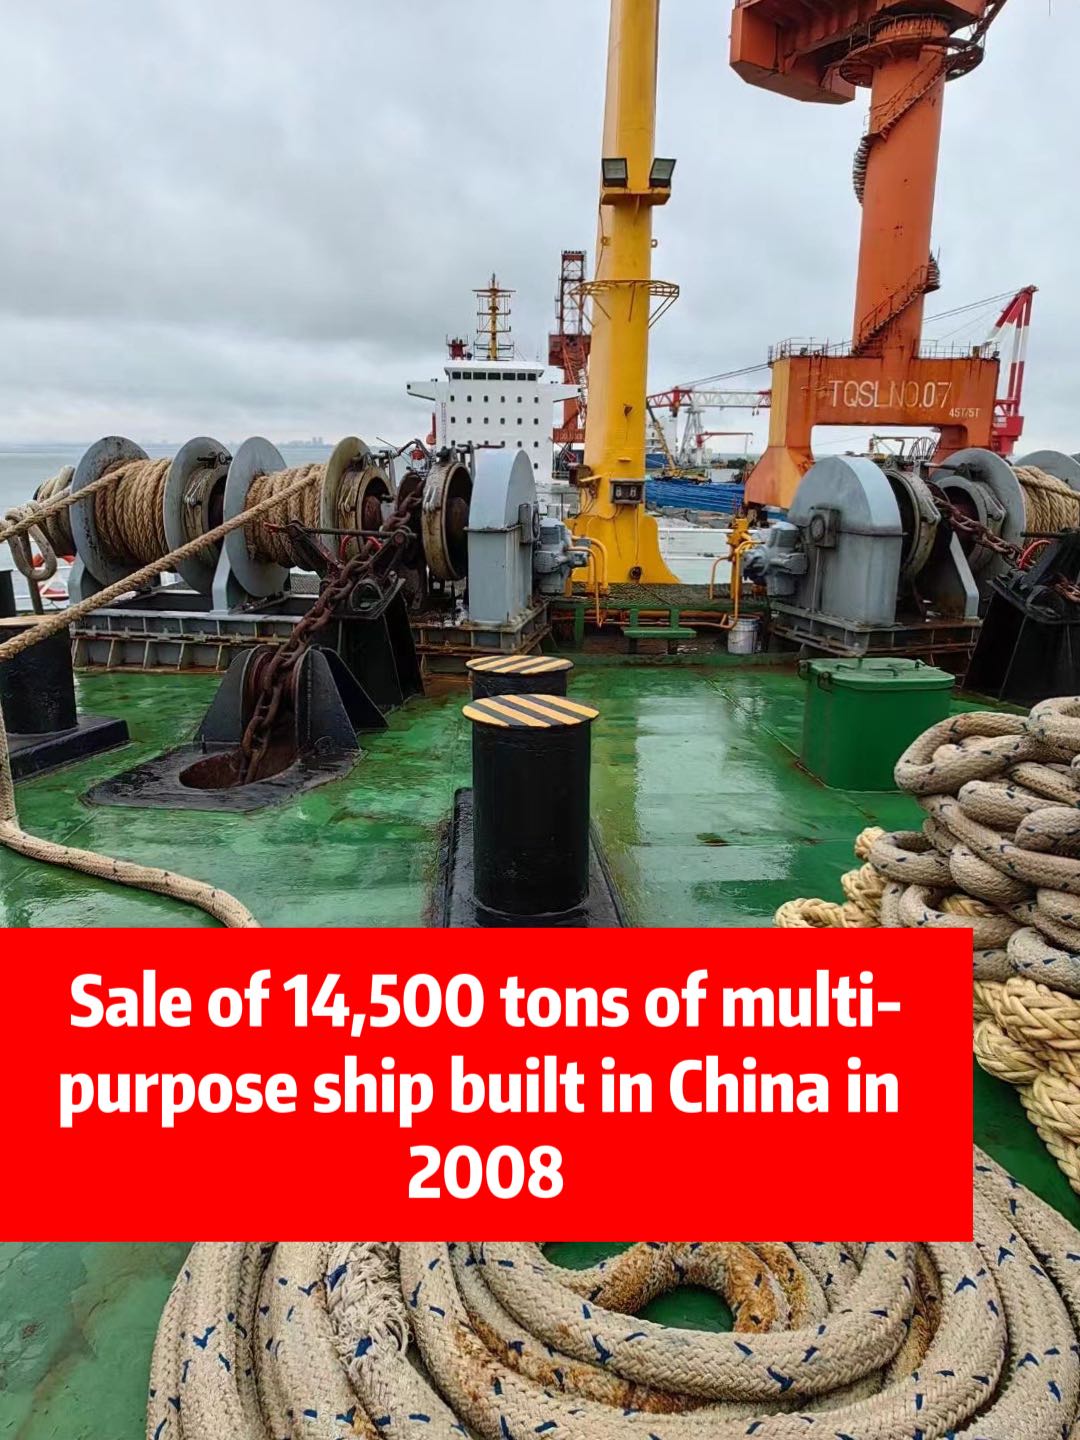 Sale of 14,500 tons of multi-purpose ship built in China in 2008